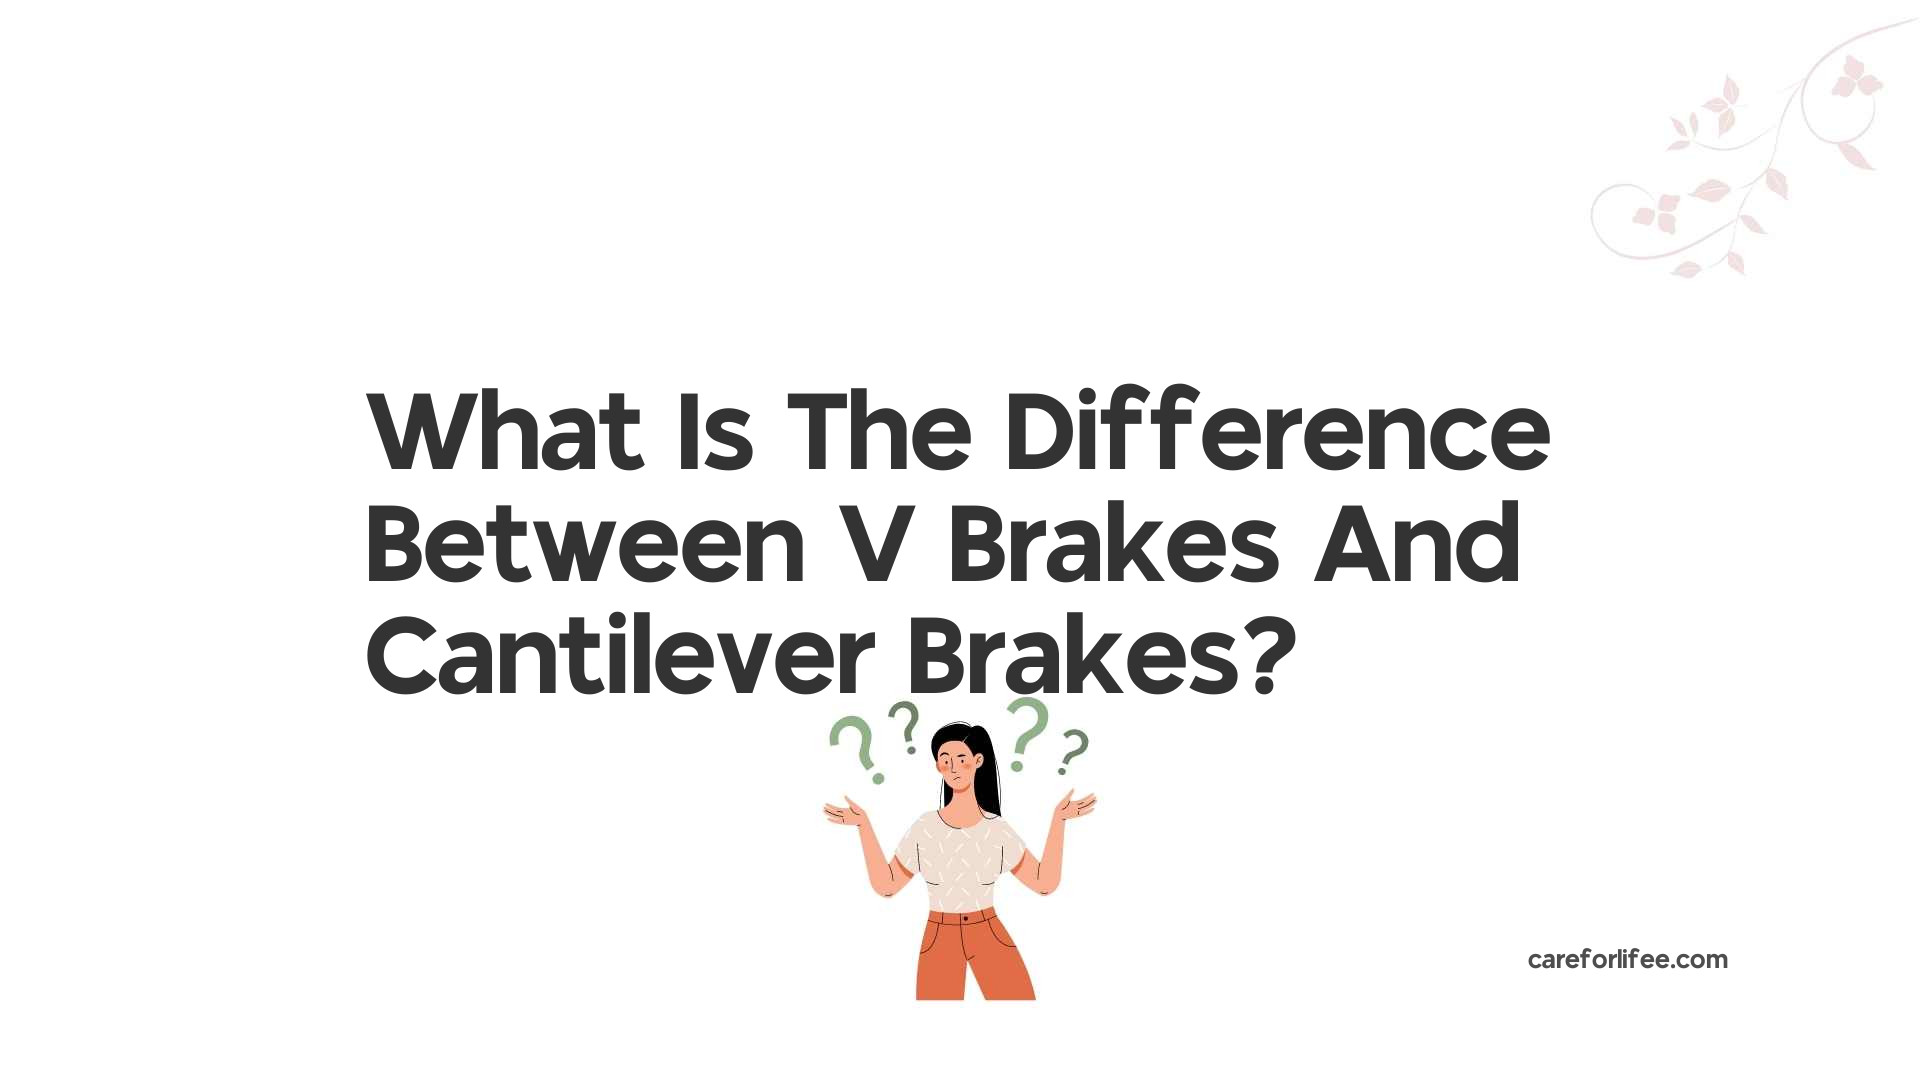 What Is The Difference Between V Brakes And Cantilever Brakes?